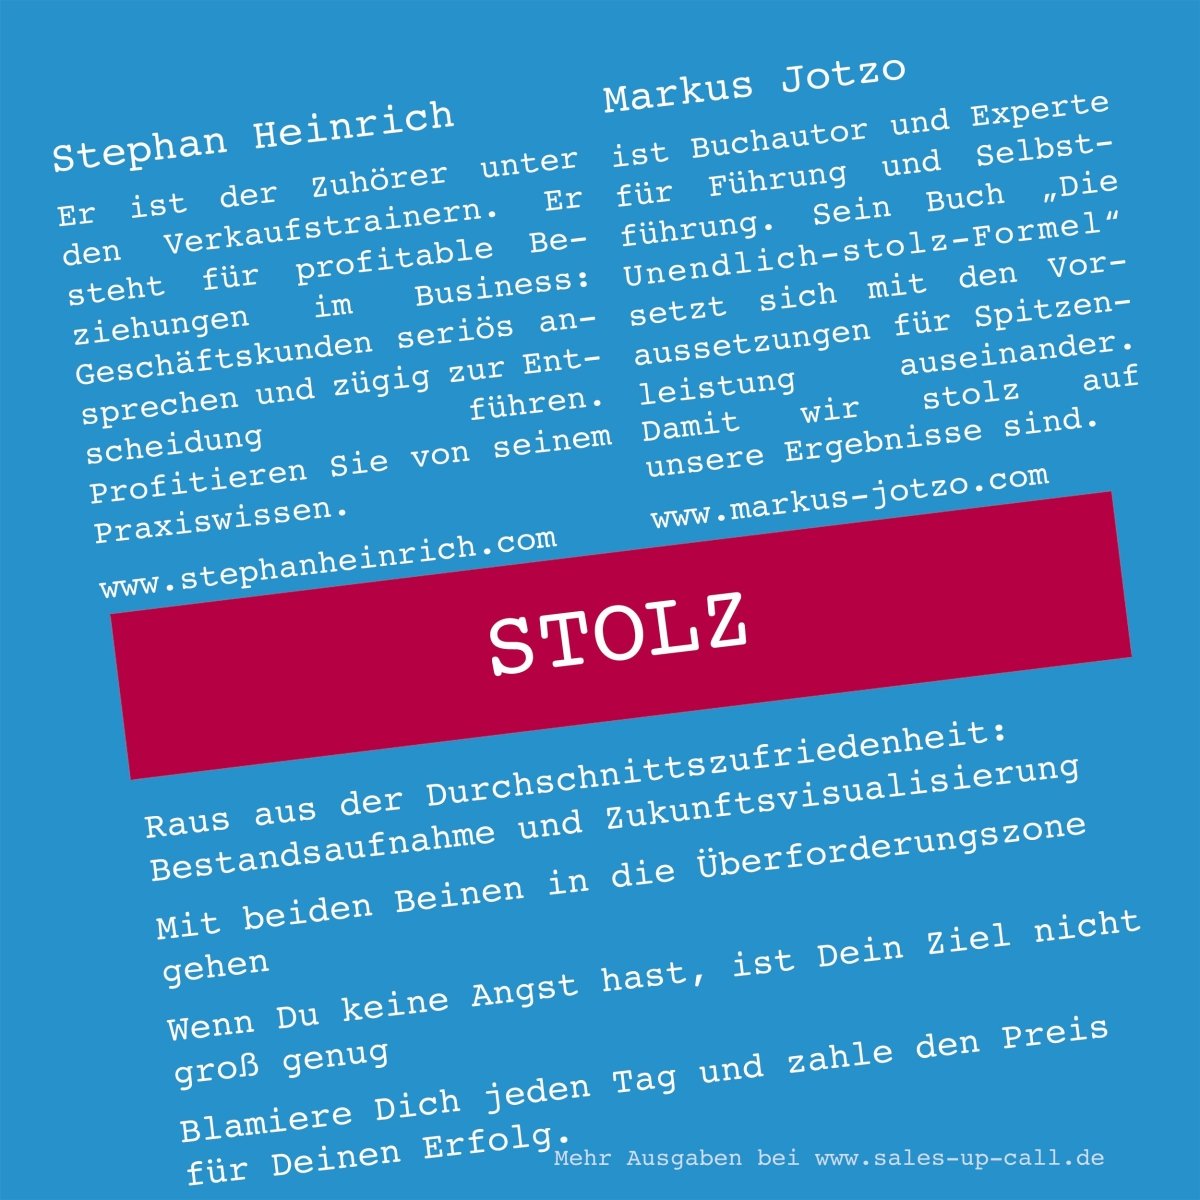 Stolz - Sales-up-Call - Stephan Heinrich